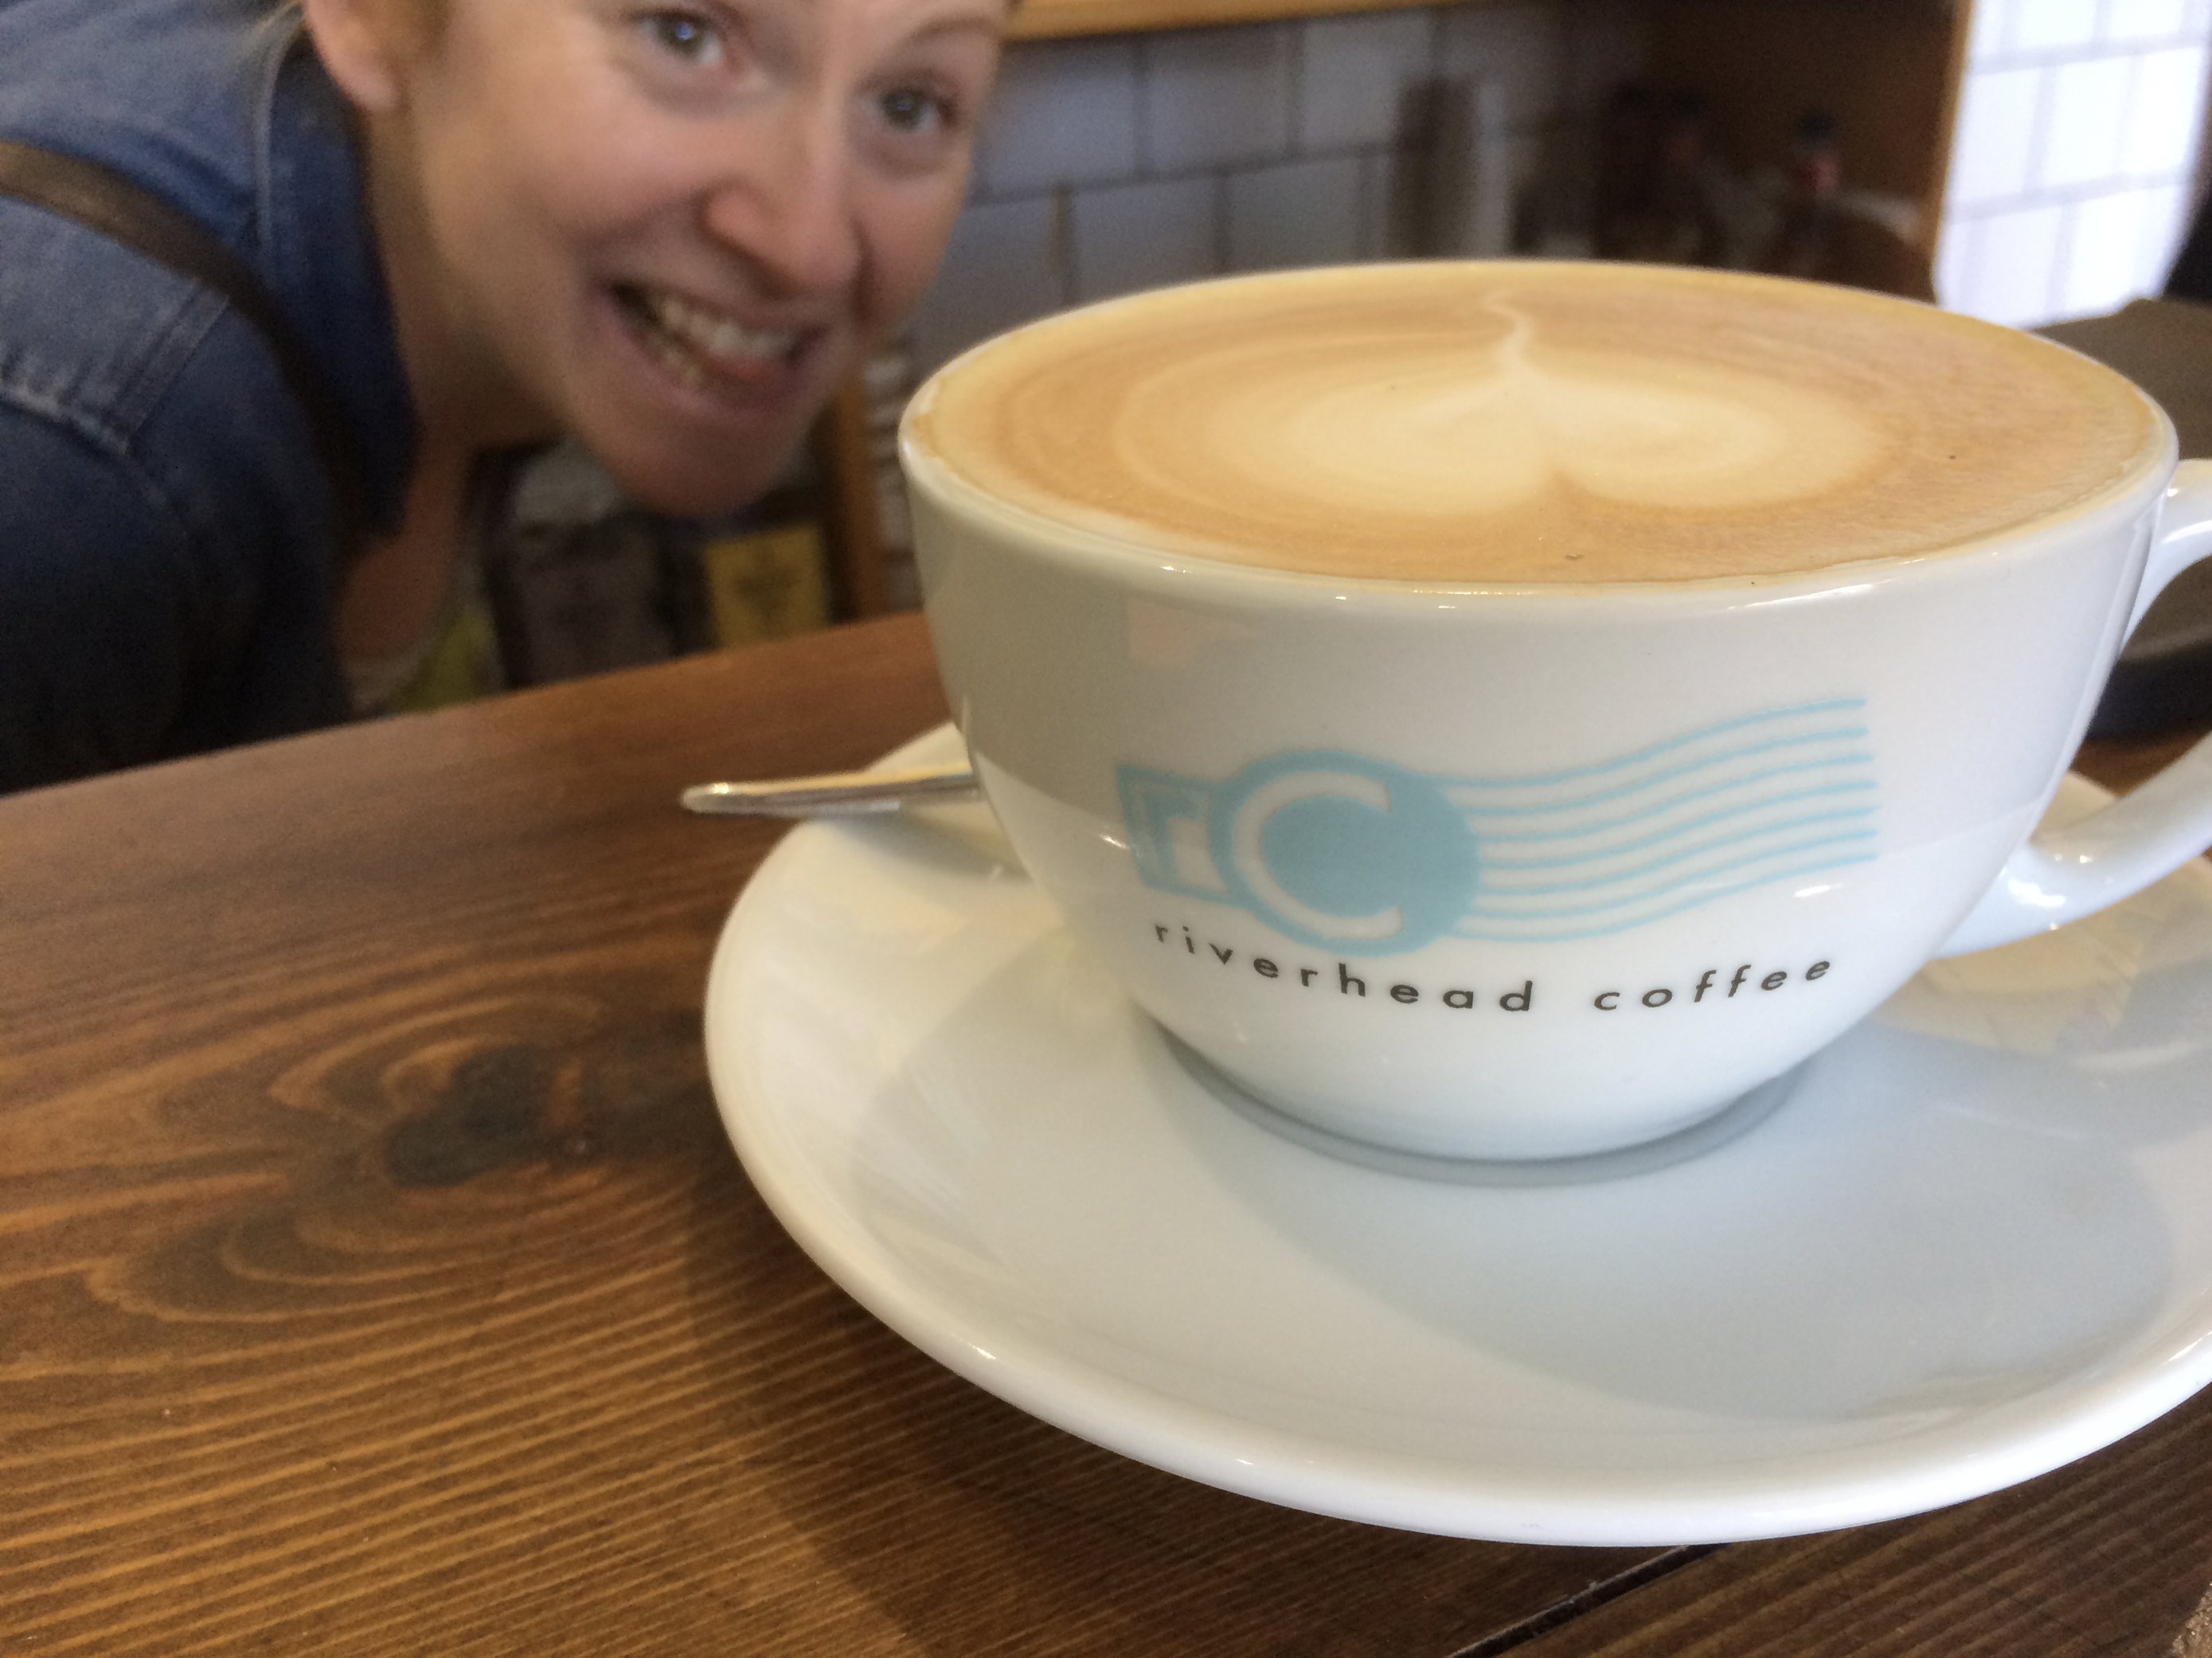 Riverhead Coffee in Grimsby - Great Grimsby Day by LincsConnect the LincsBlogger